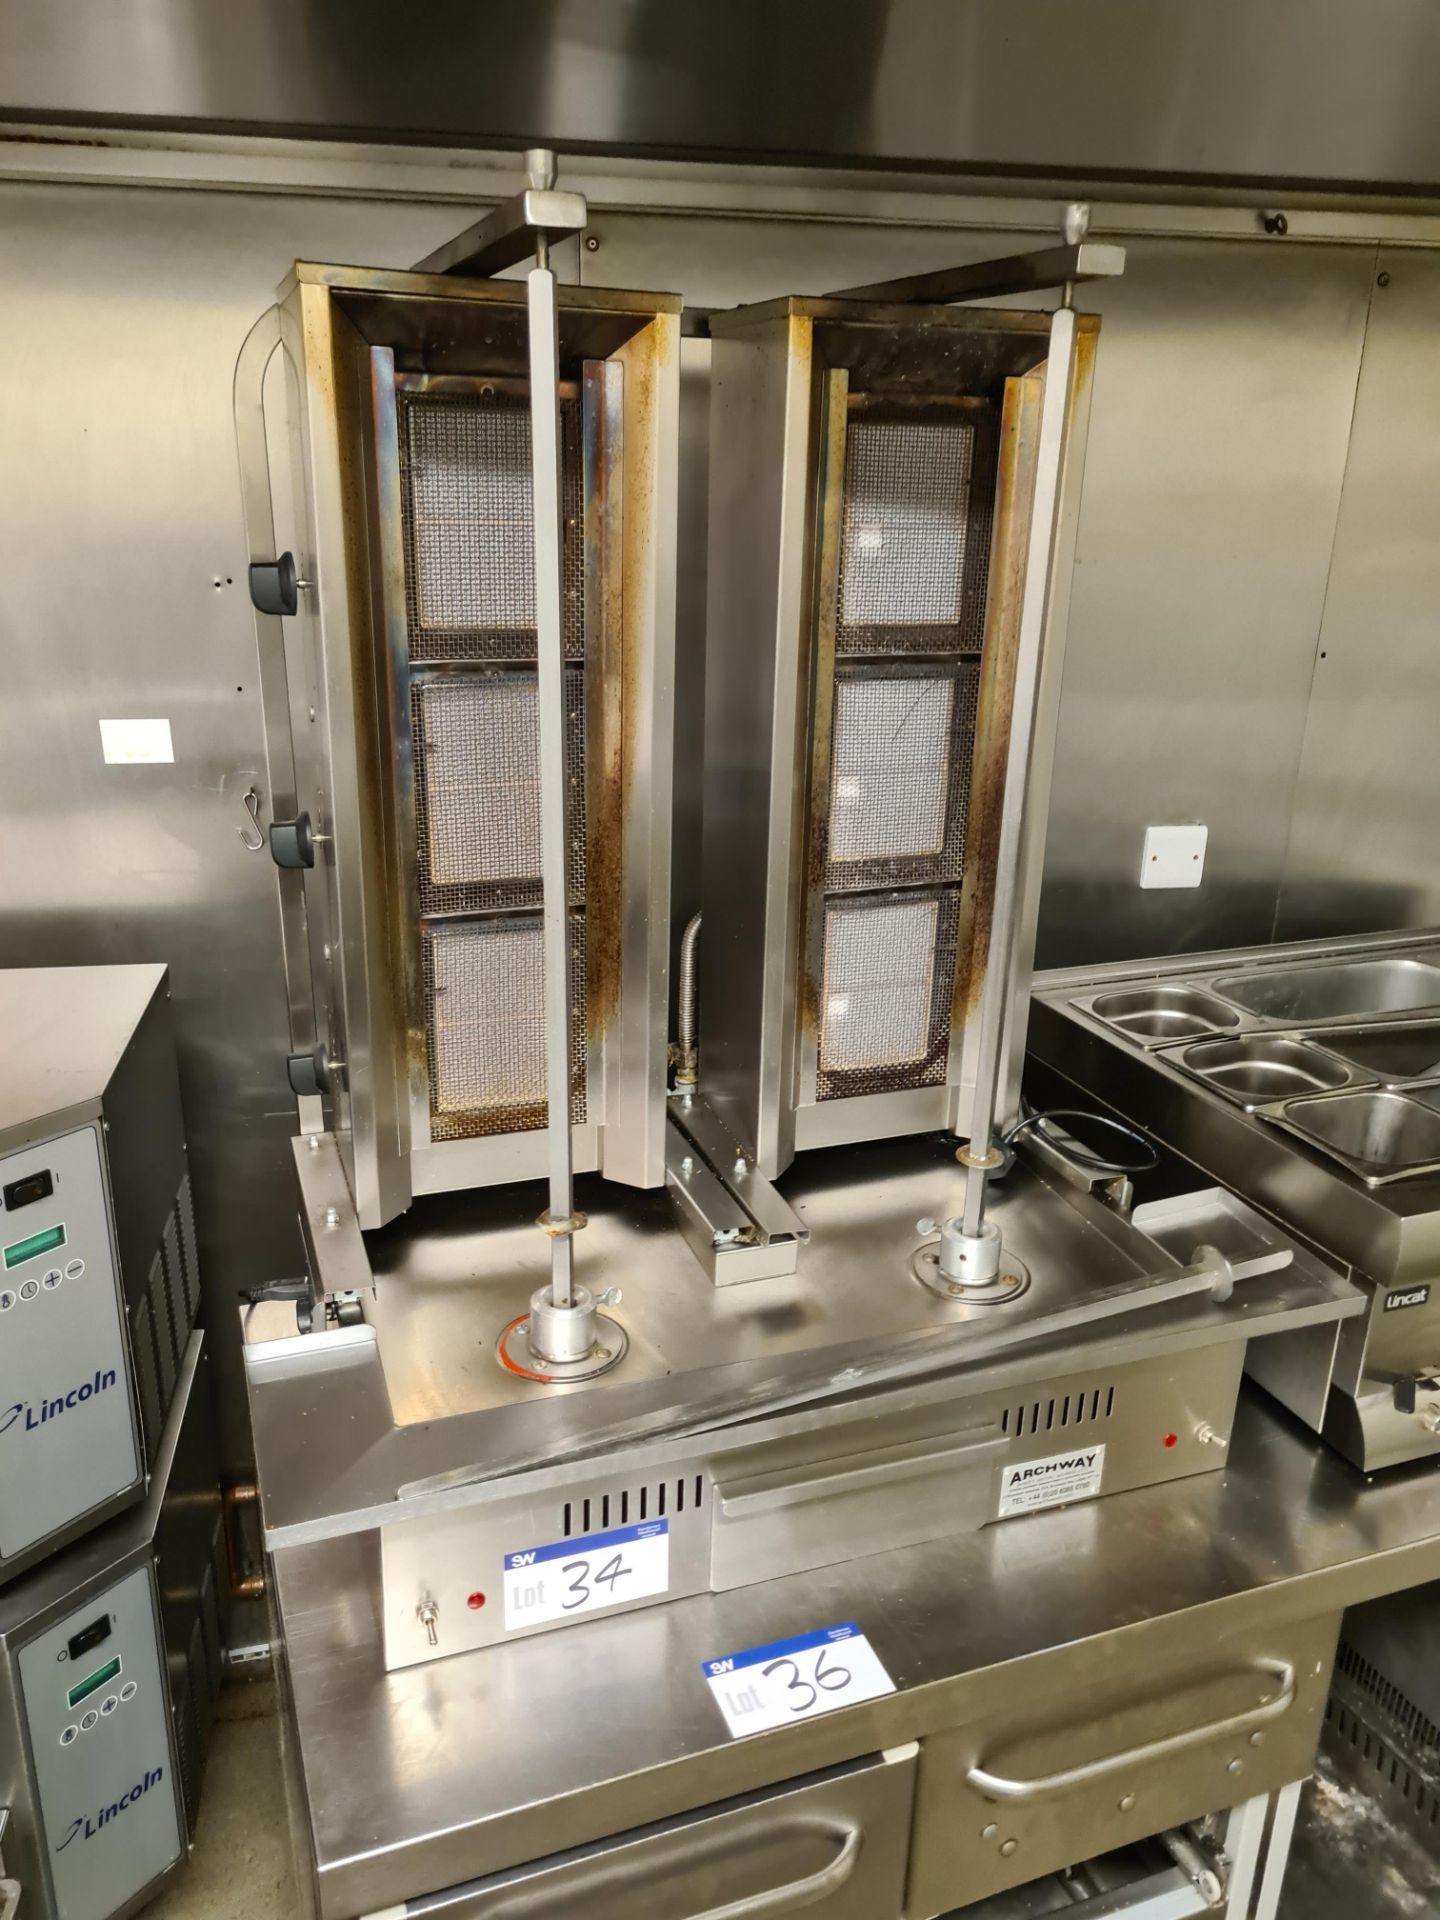 ARCHWAY 3BT/NG Stainless Steel Twin Doner Kebab Heater Stand (240V) (Gas Needs Disconnecting and